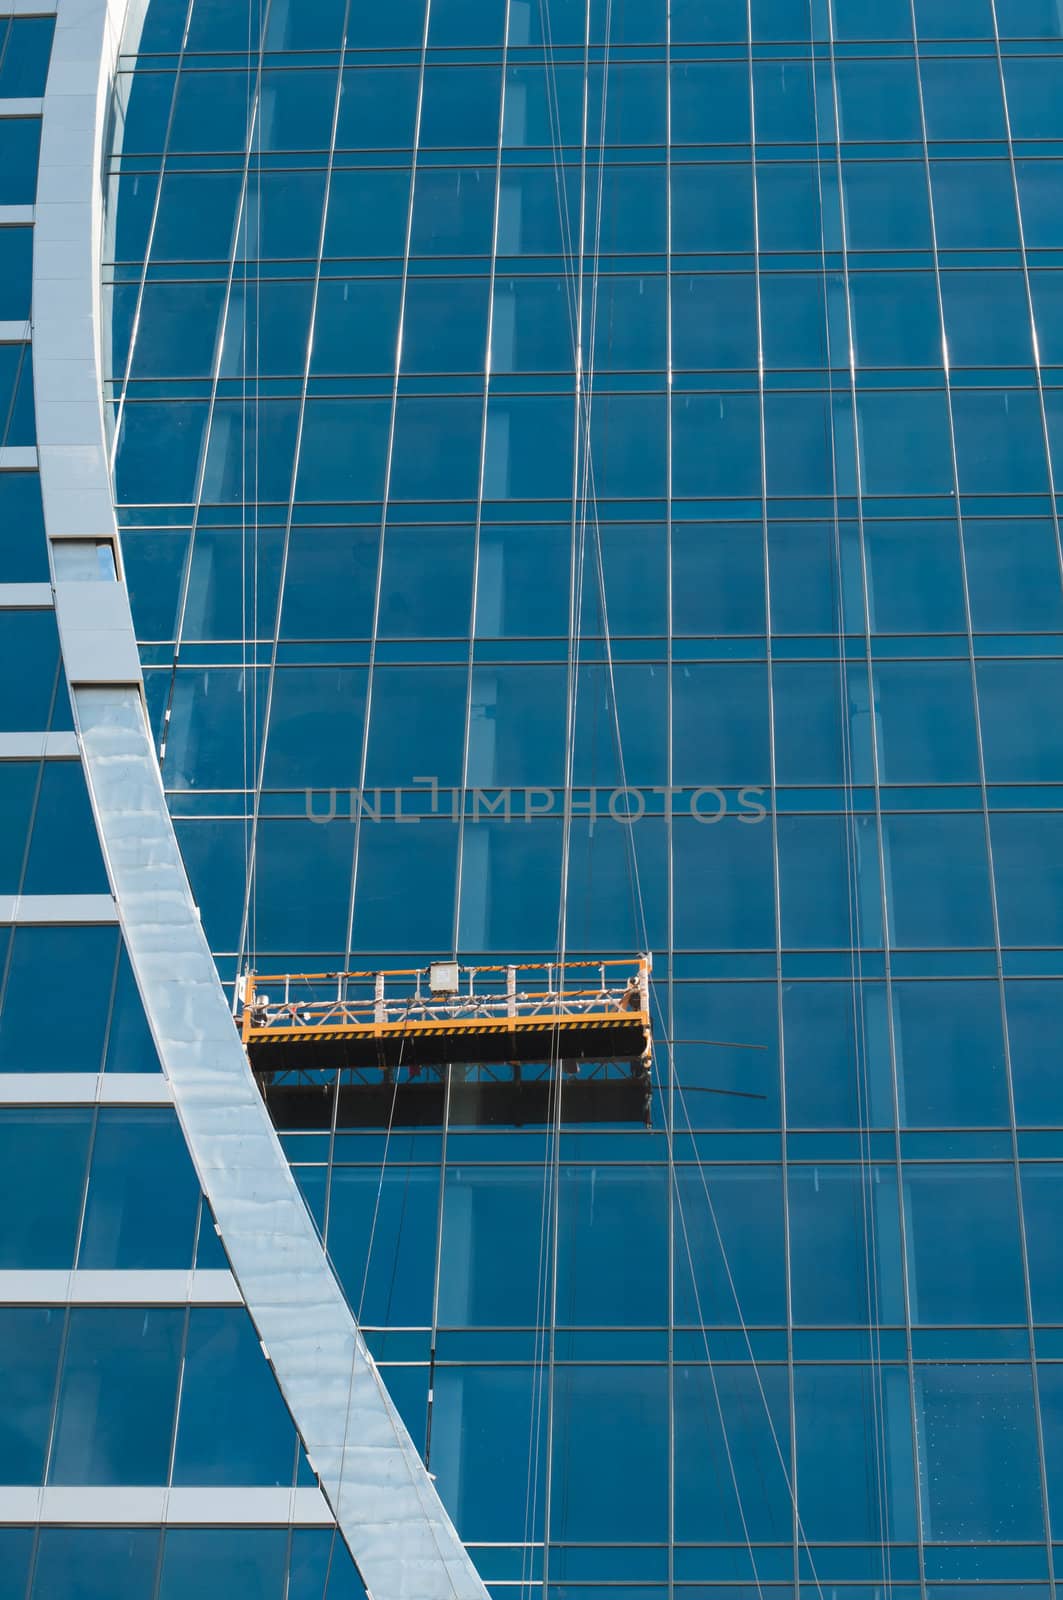 The glass wall of office building by nvelichko